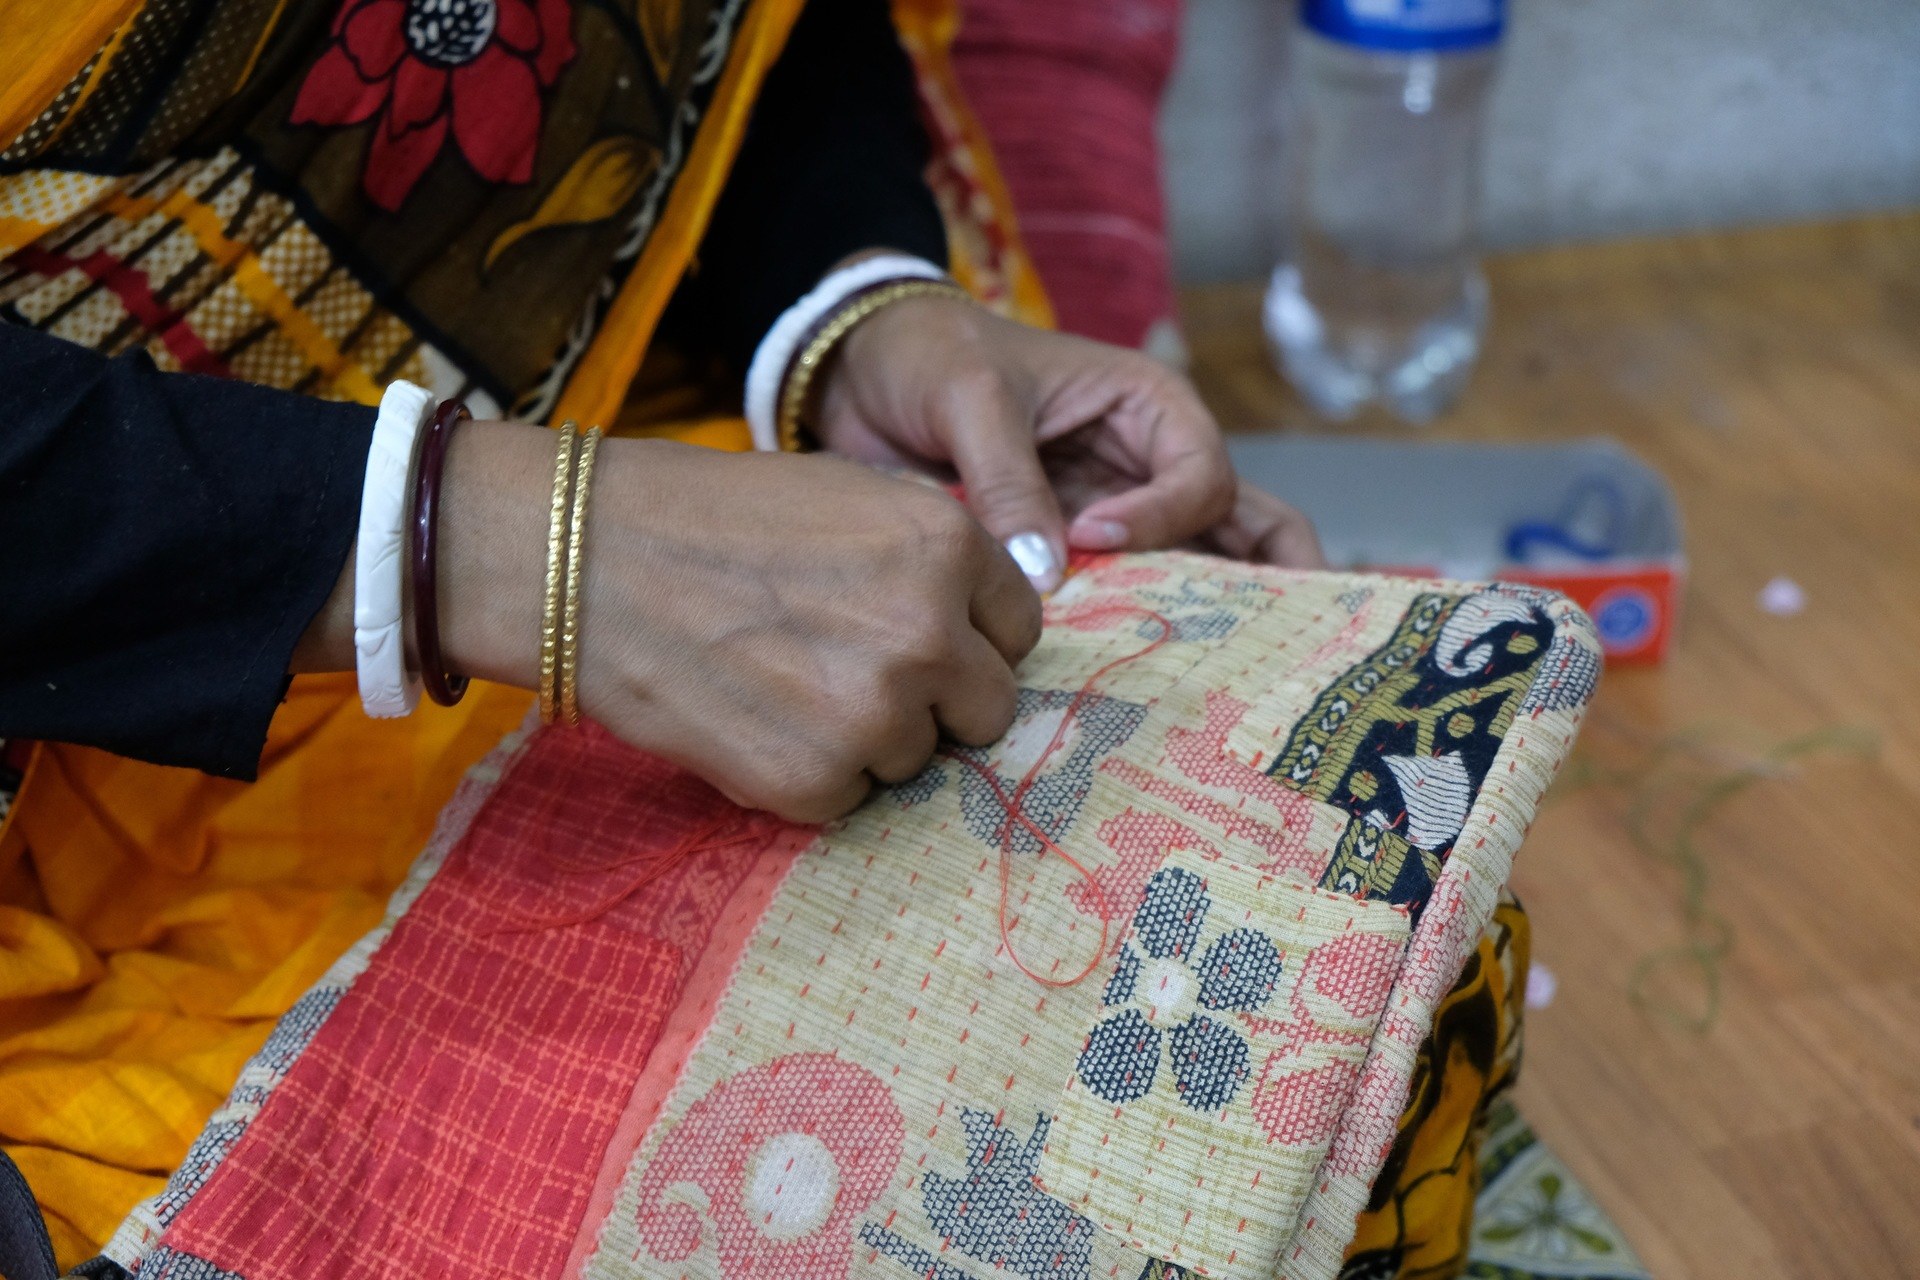 Hands of a woman rescued from trafficking sewing a bag in Kantha